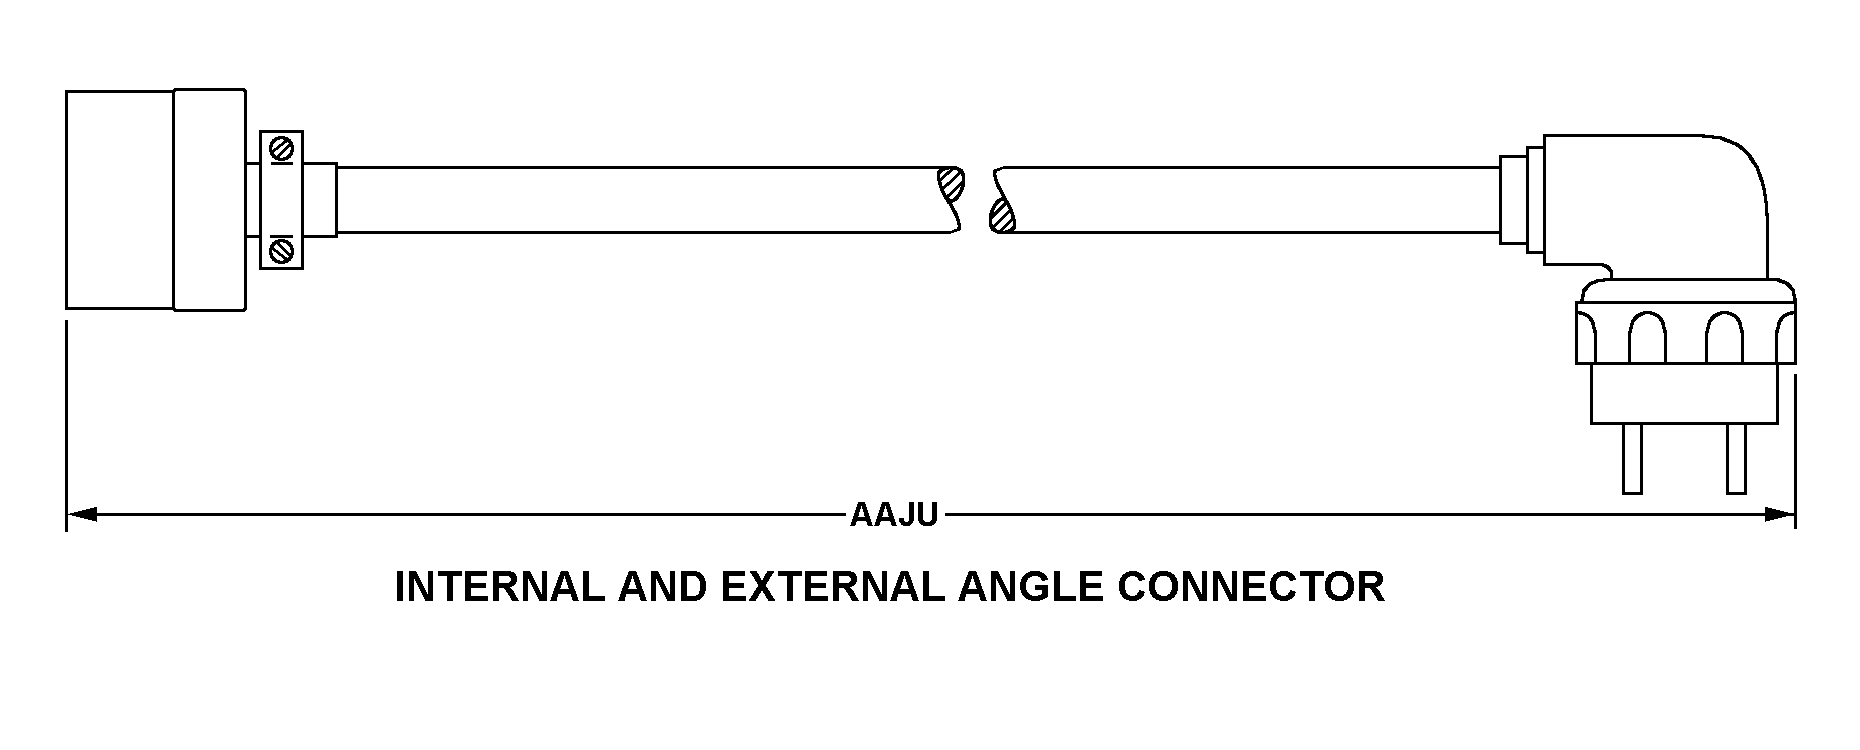 INTERNAL AND EXTERNAL ANGLE CONNECTOR style nsn 5995-01-060-3459